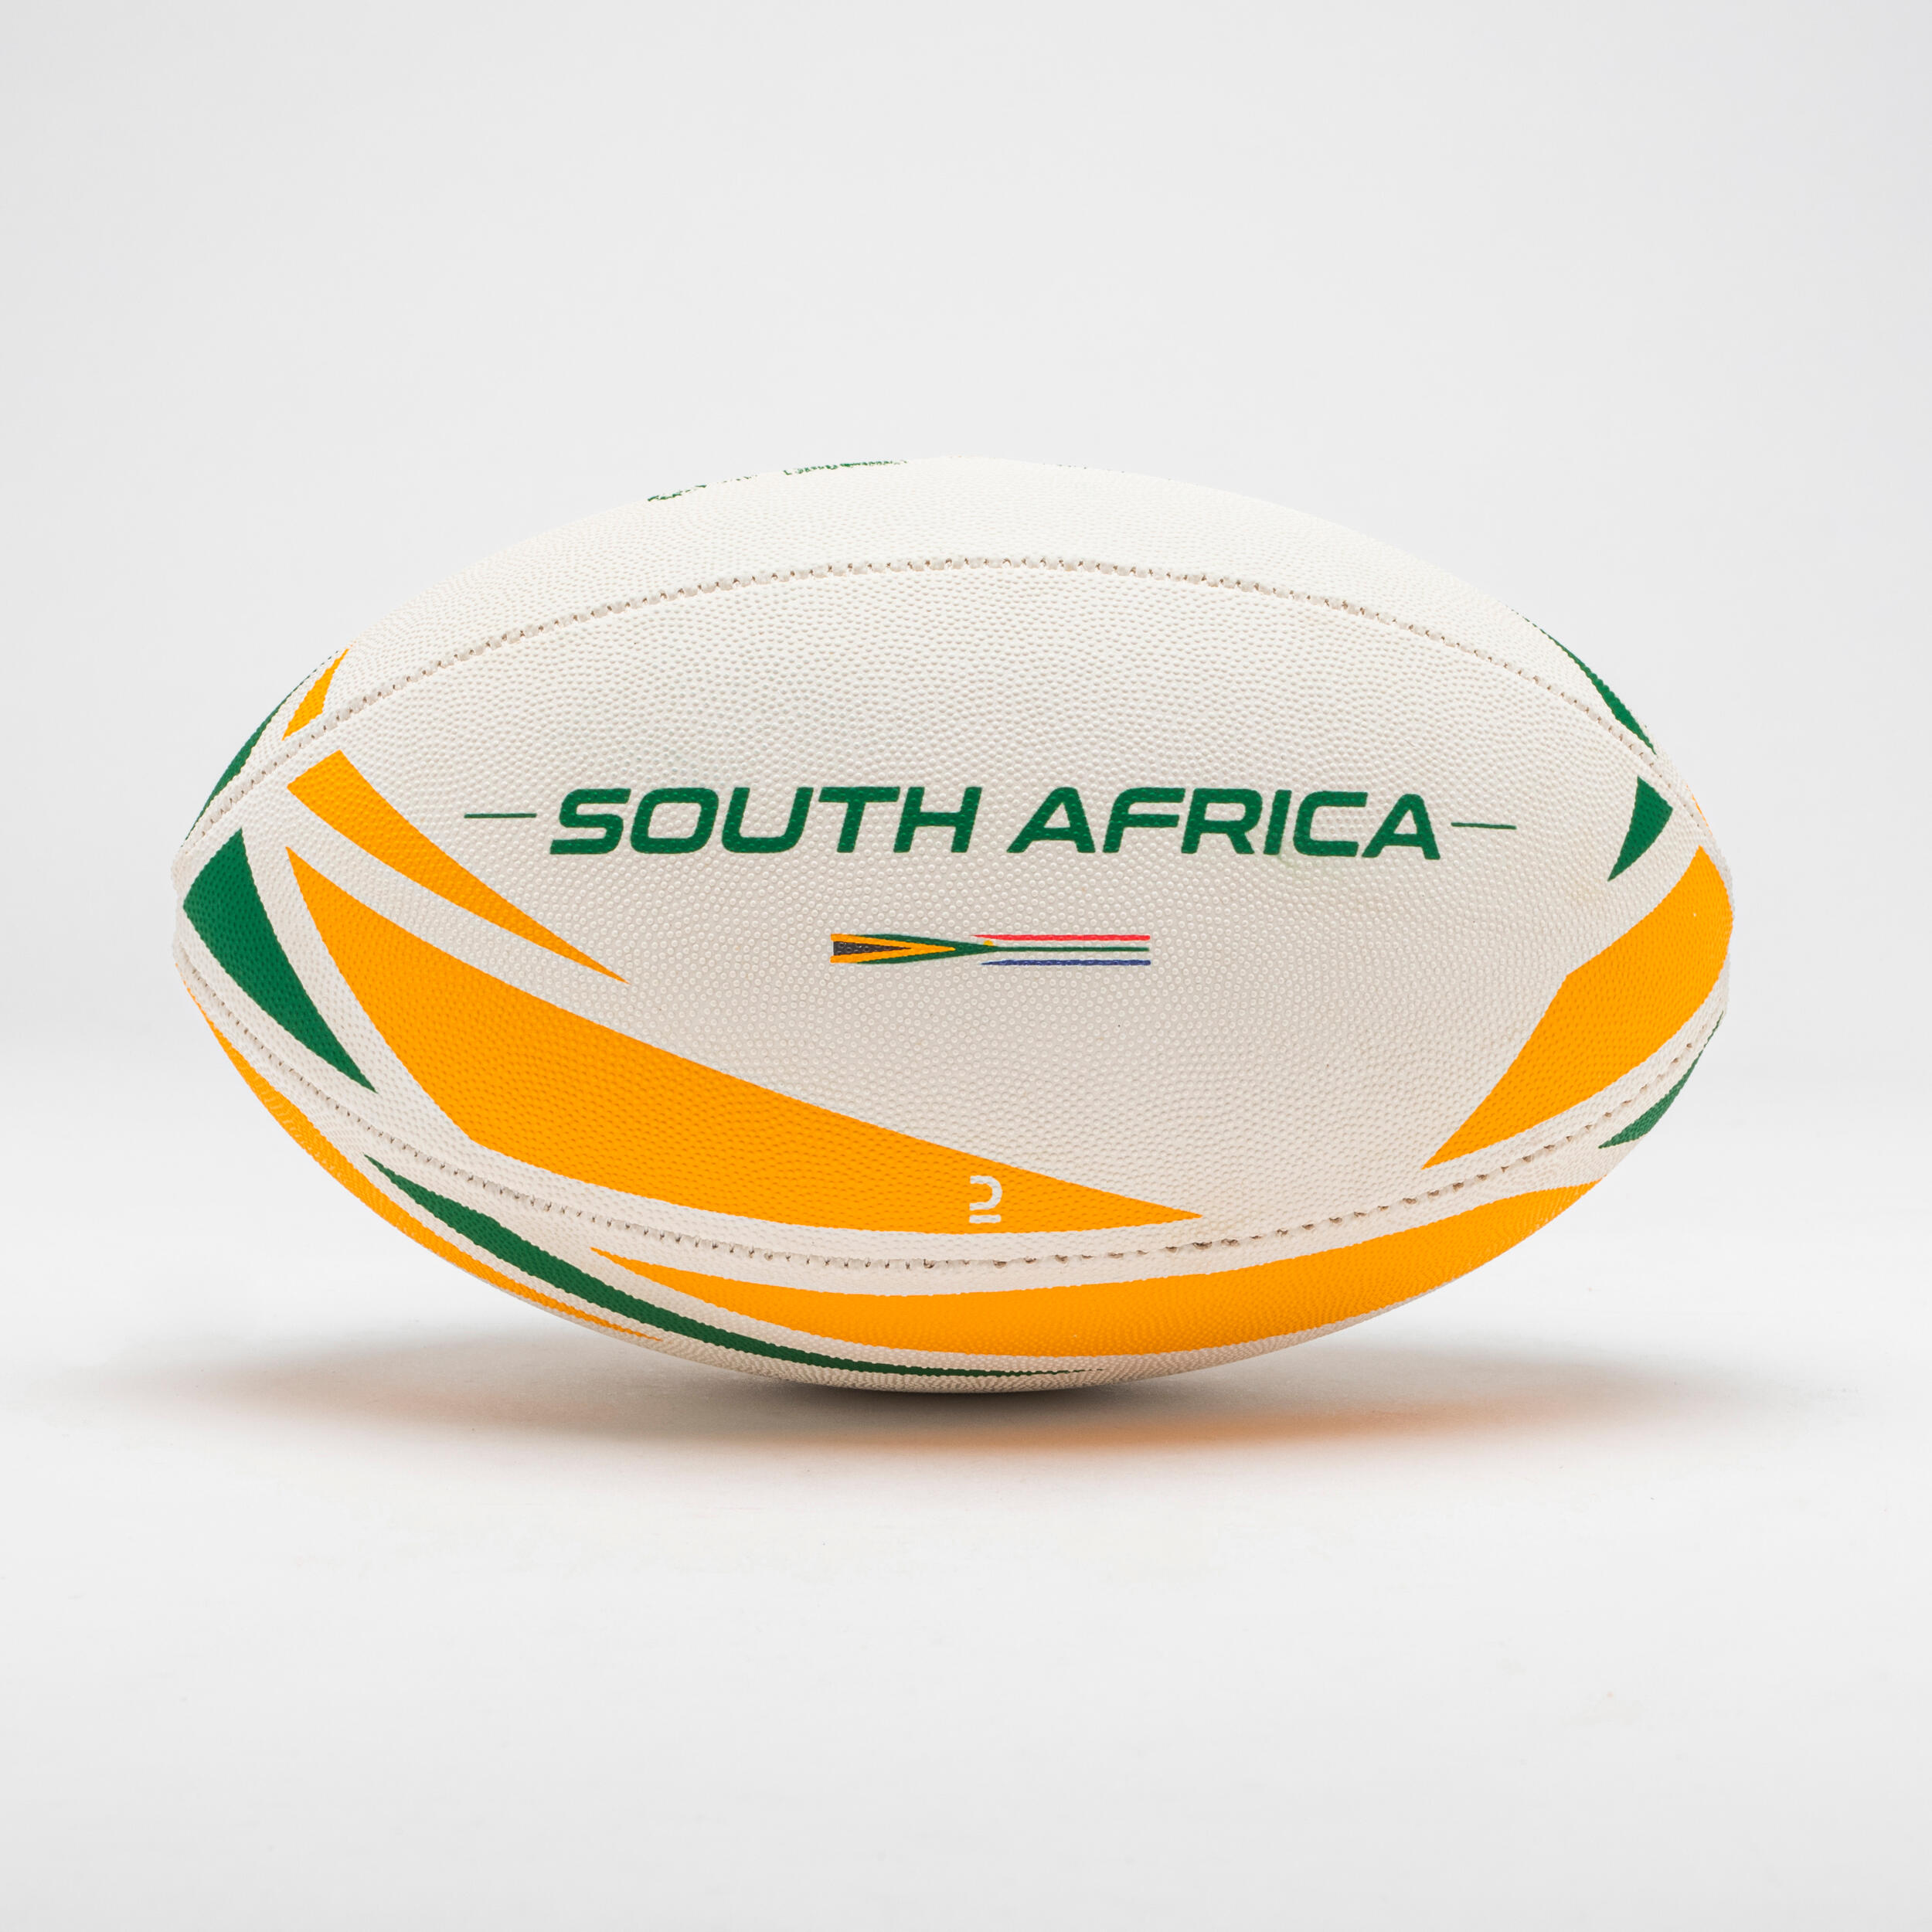 OFFLOAD Rugby Ball Size 1 - South Africa